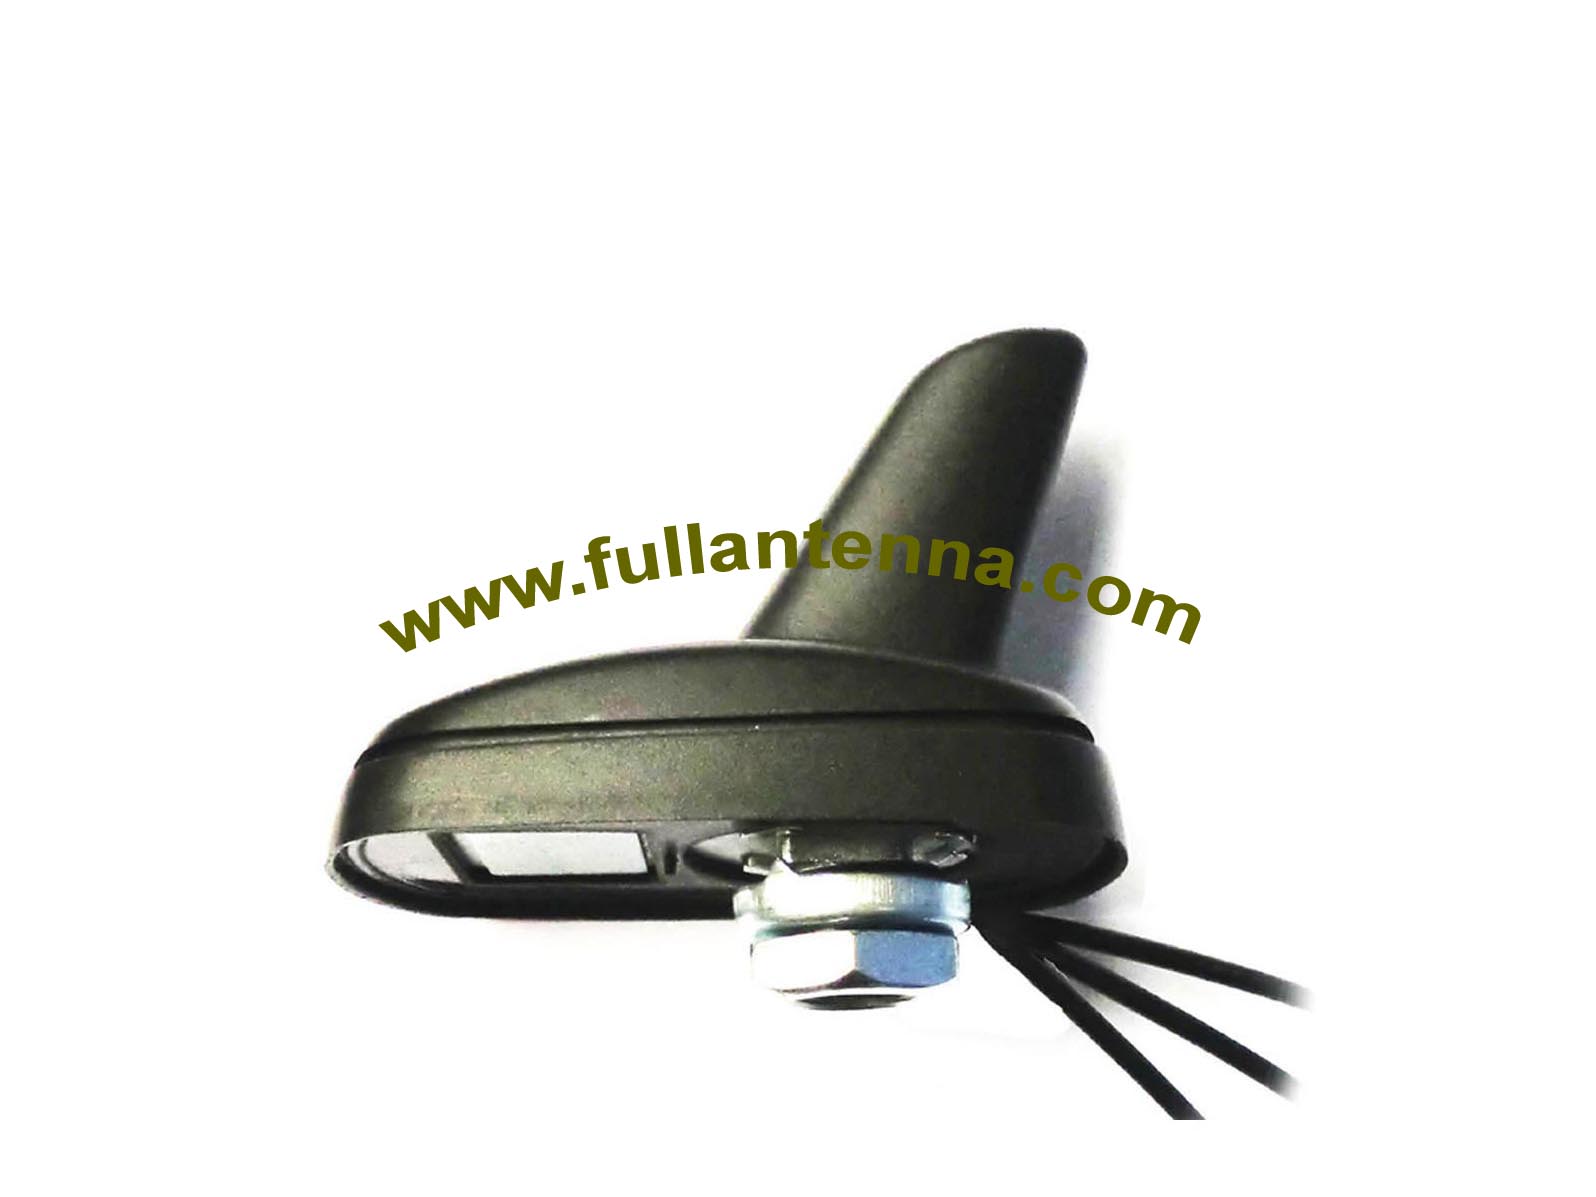 P/N:FAGPSGSMWifi.02 ,3 In 1 Combined Antenna,  screw mount gps gsm wifi antenna Featured Image